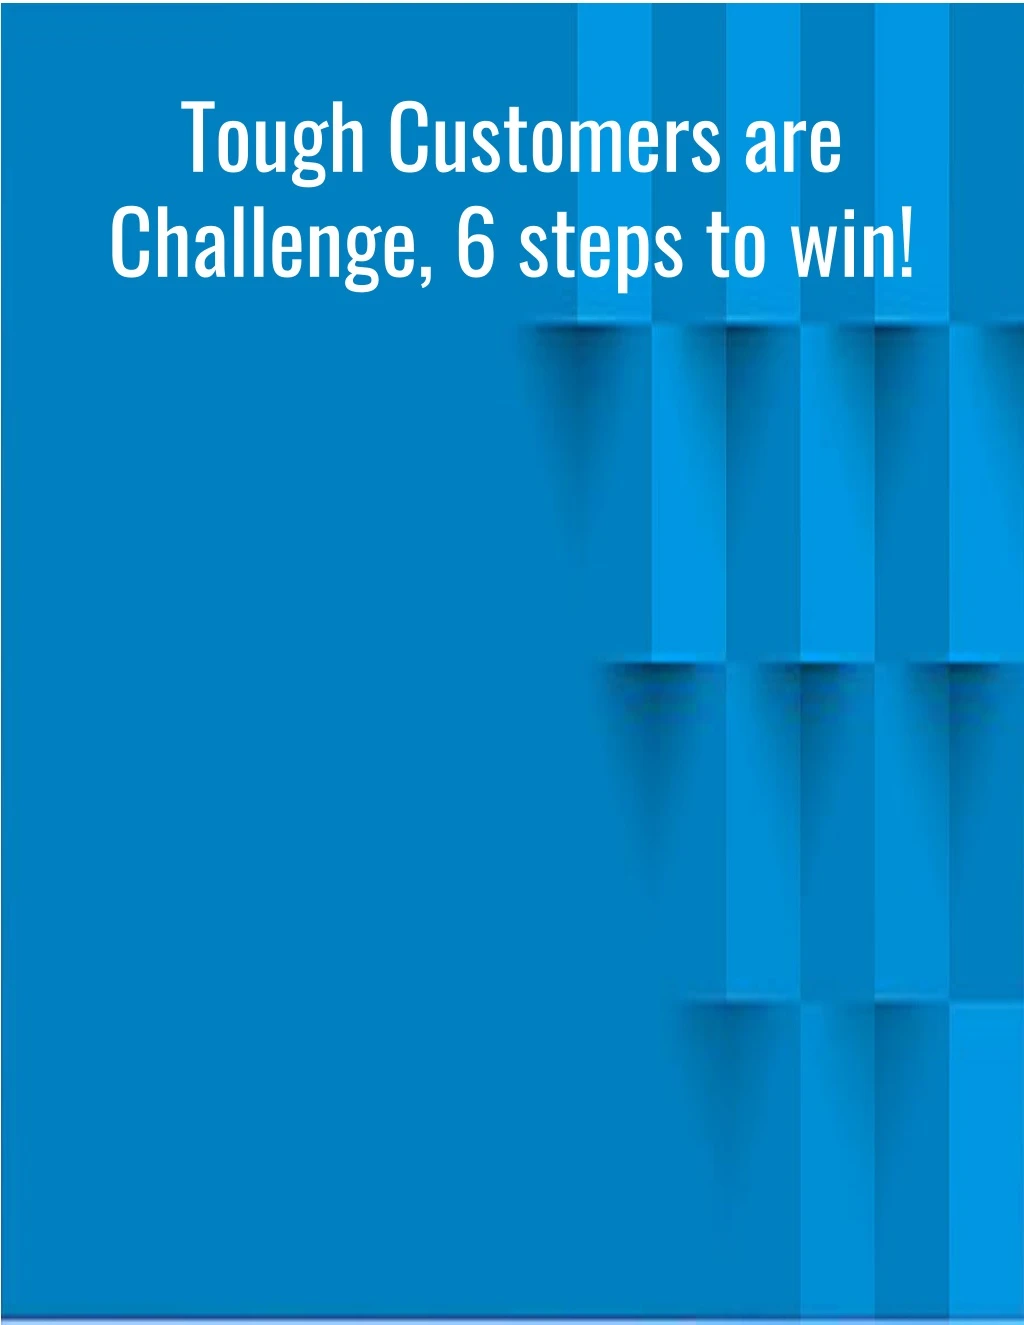 tough customers are challenge 6 steps to win